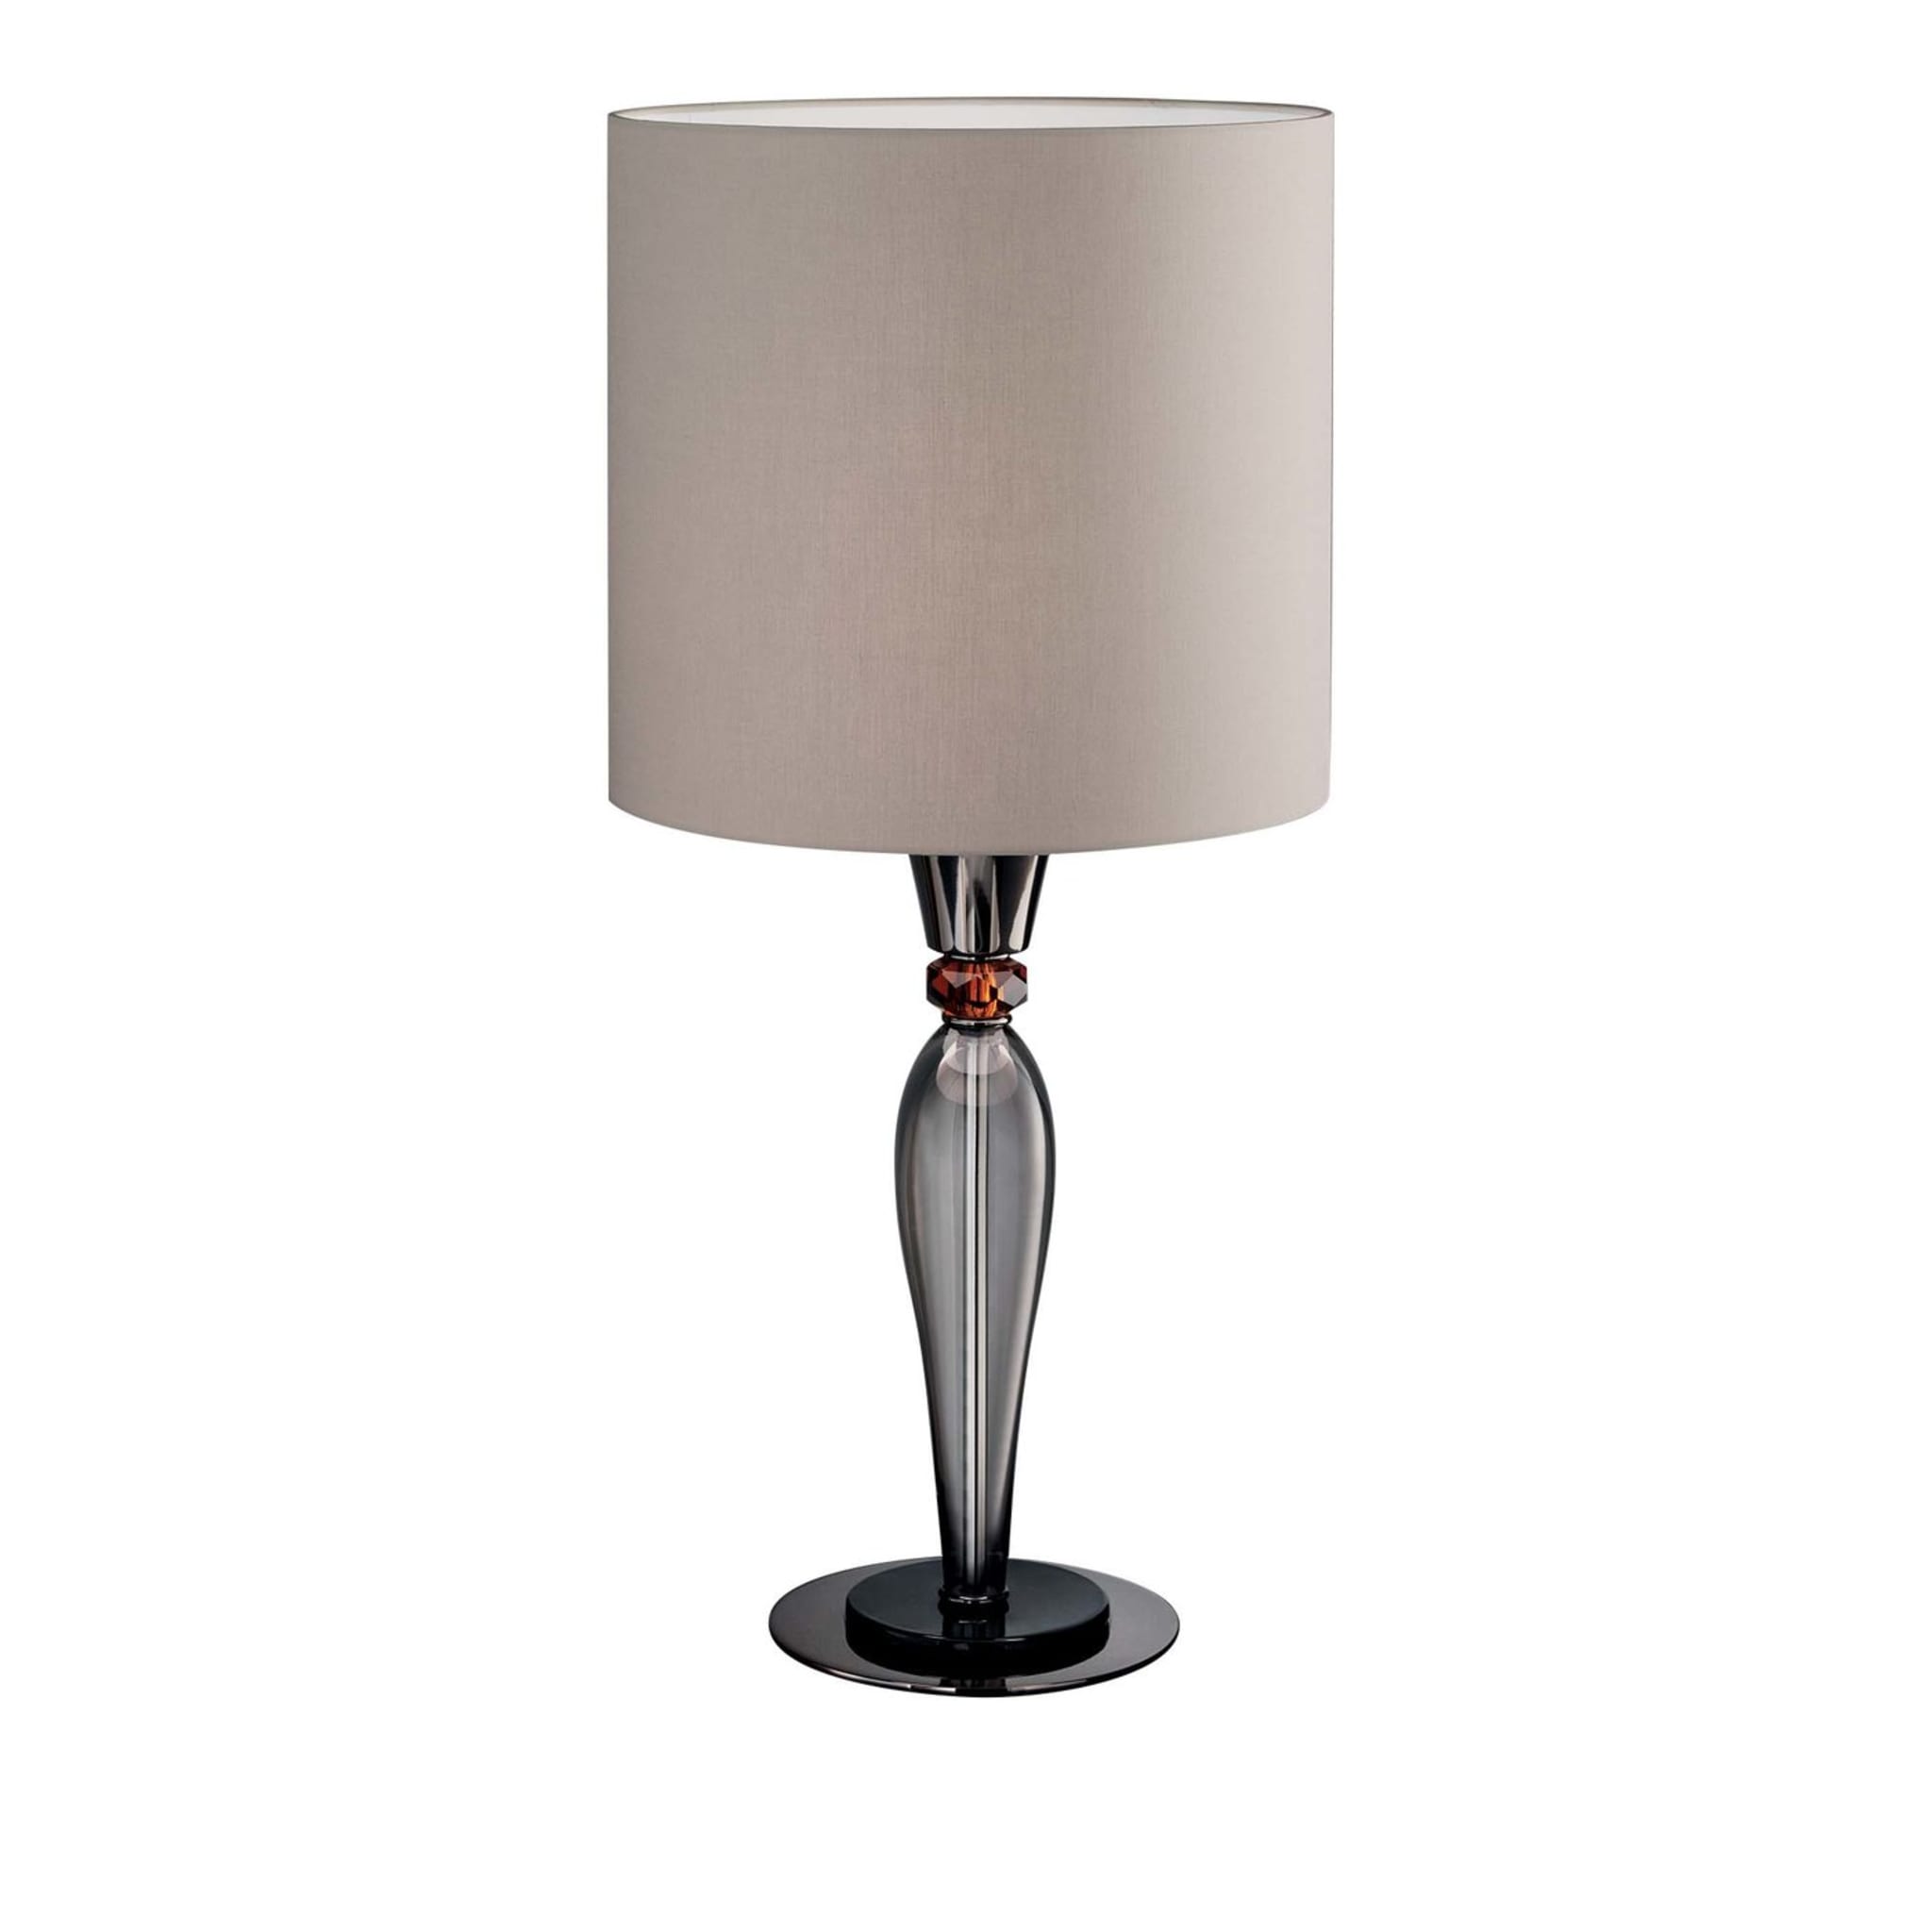 Olympia LG1 table lamp - Main view